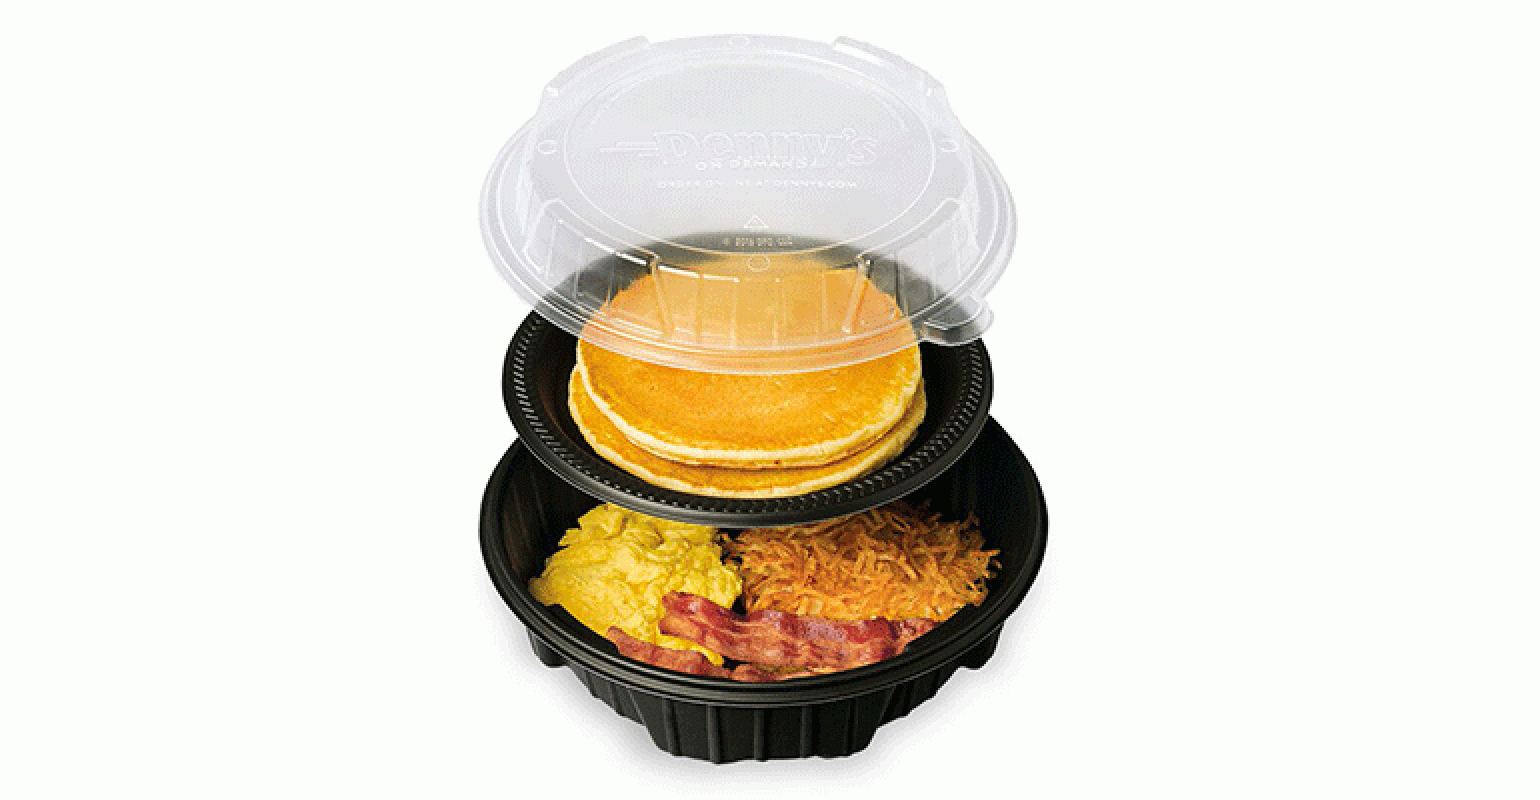 Types of Restaurant Take-out Containers